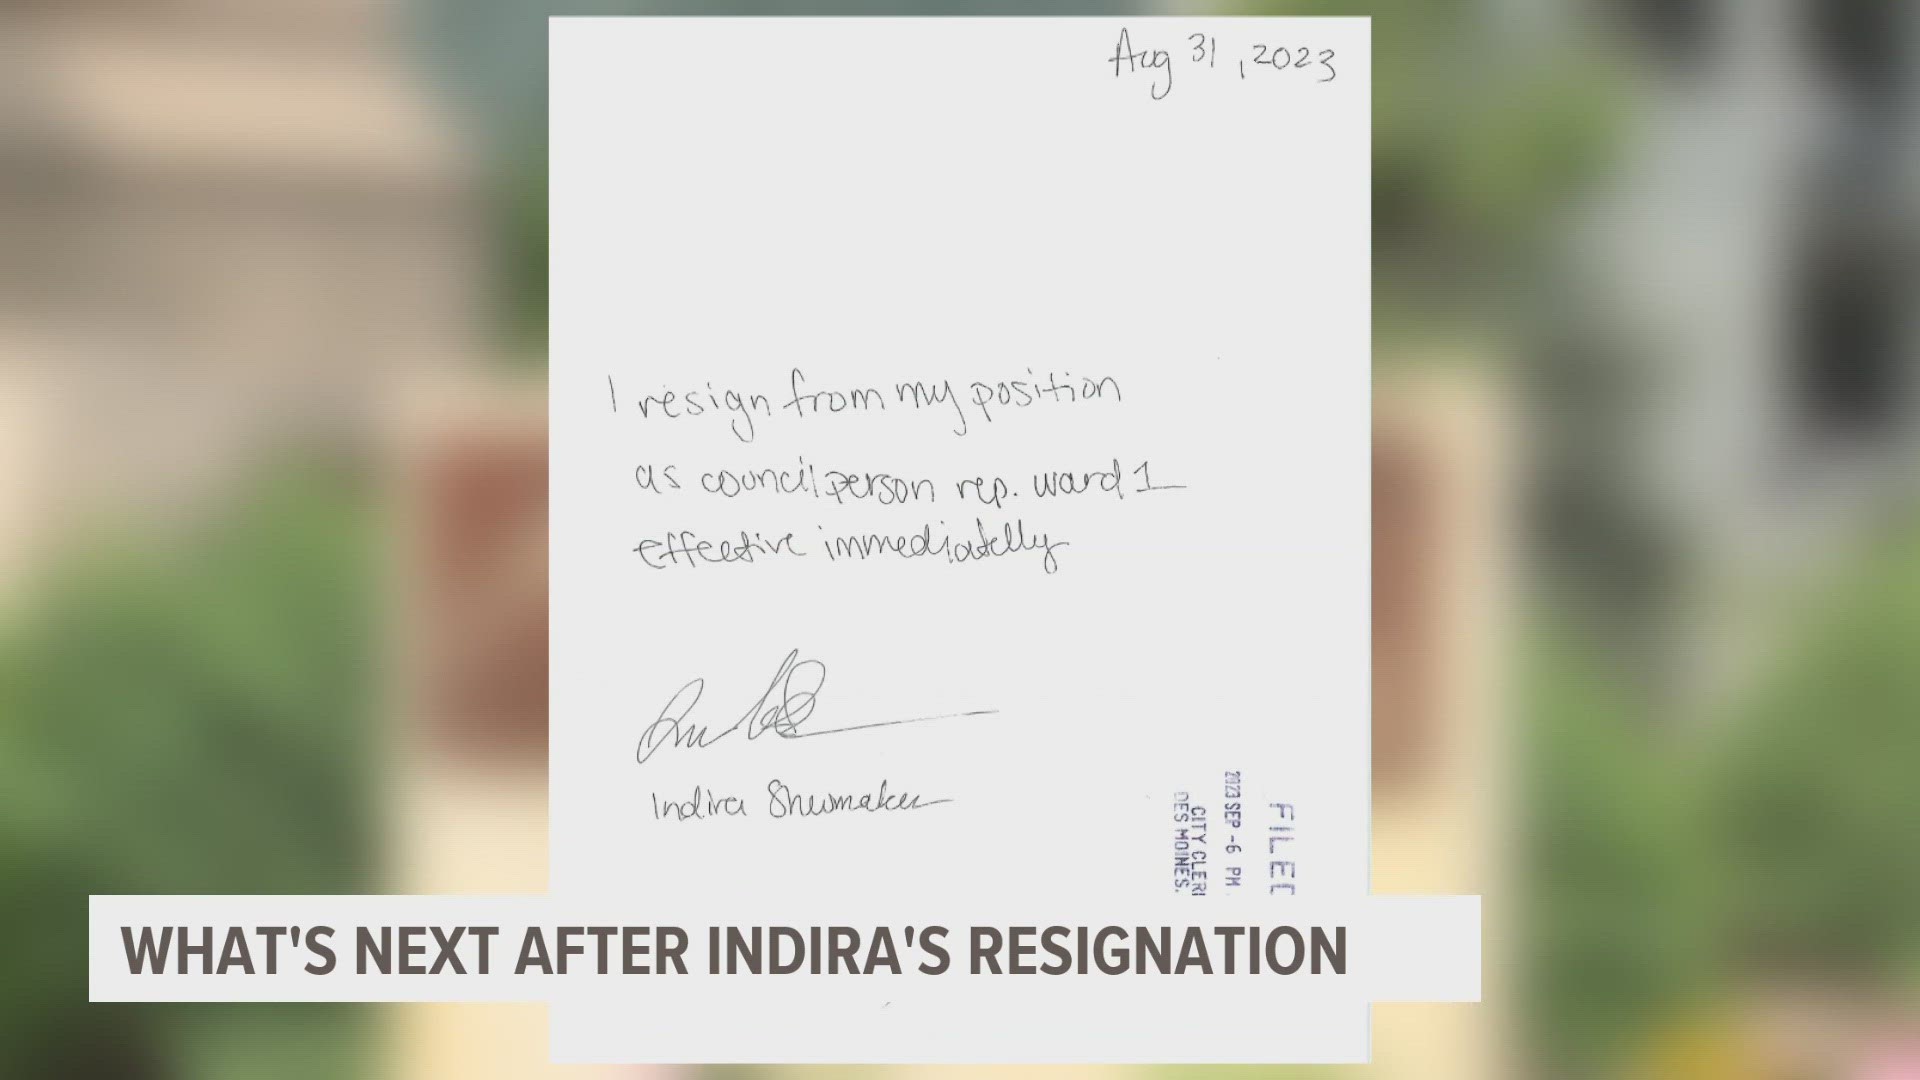 In the resignation letter dated Aug. 31, Sheumaker writes simply: "I resign from my position as councilperson Rep. Ward 1 effective immediately."